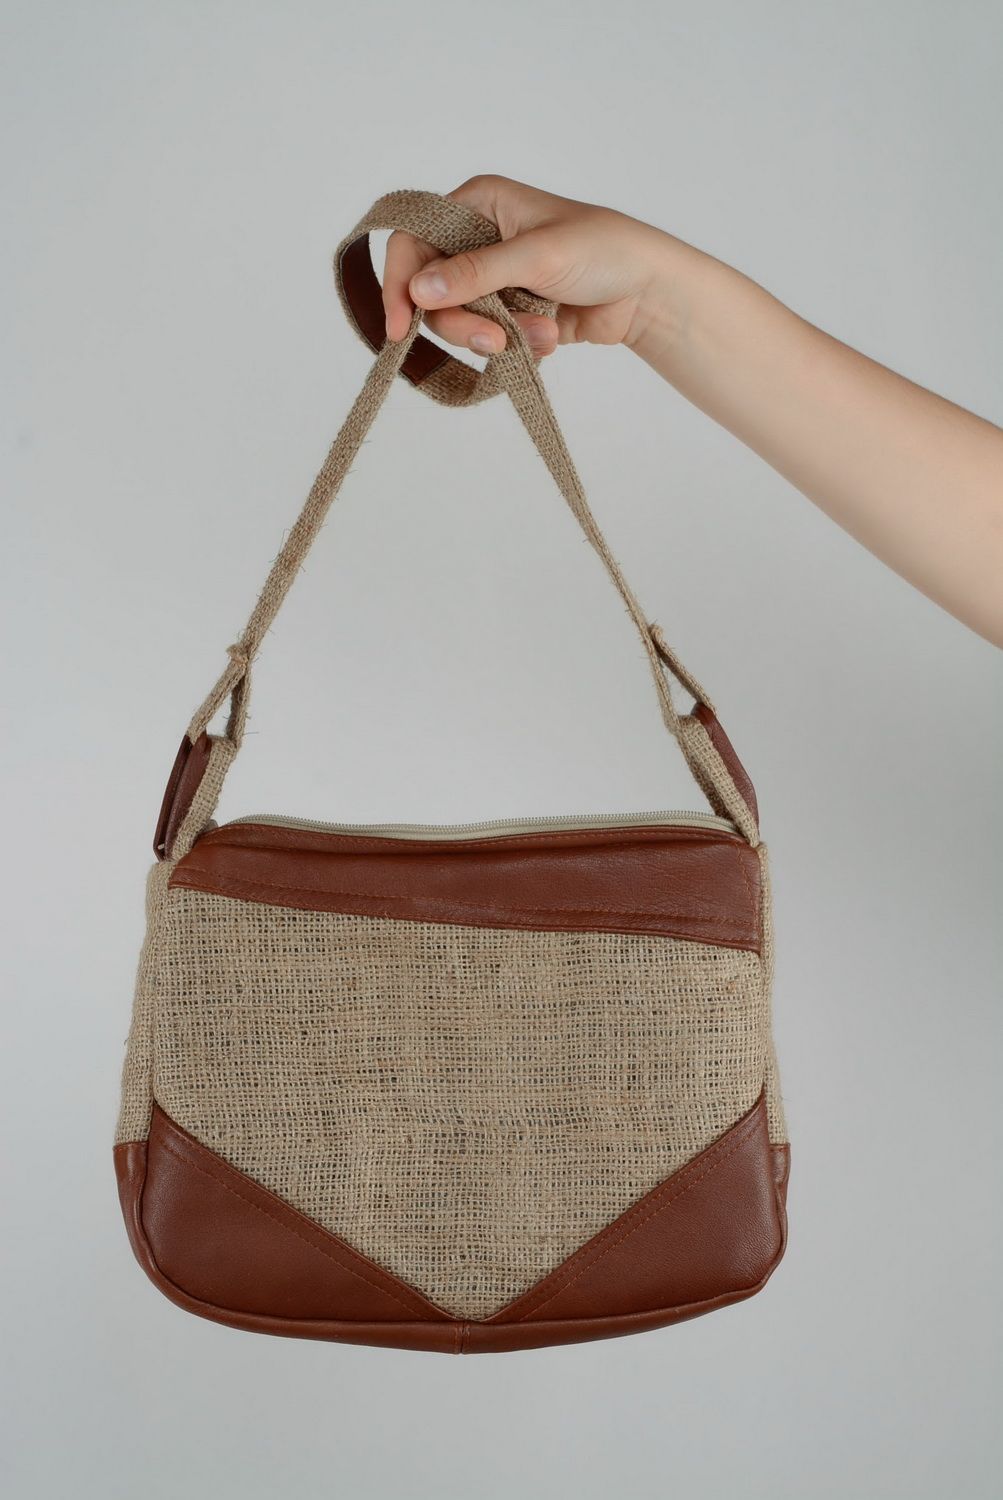 Purse made of leather and fabric photo 3